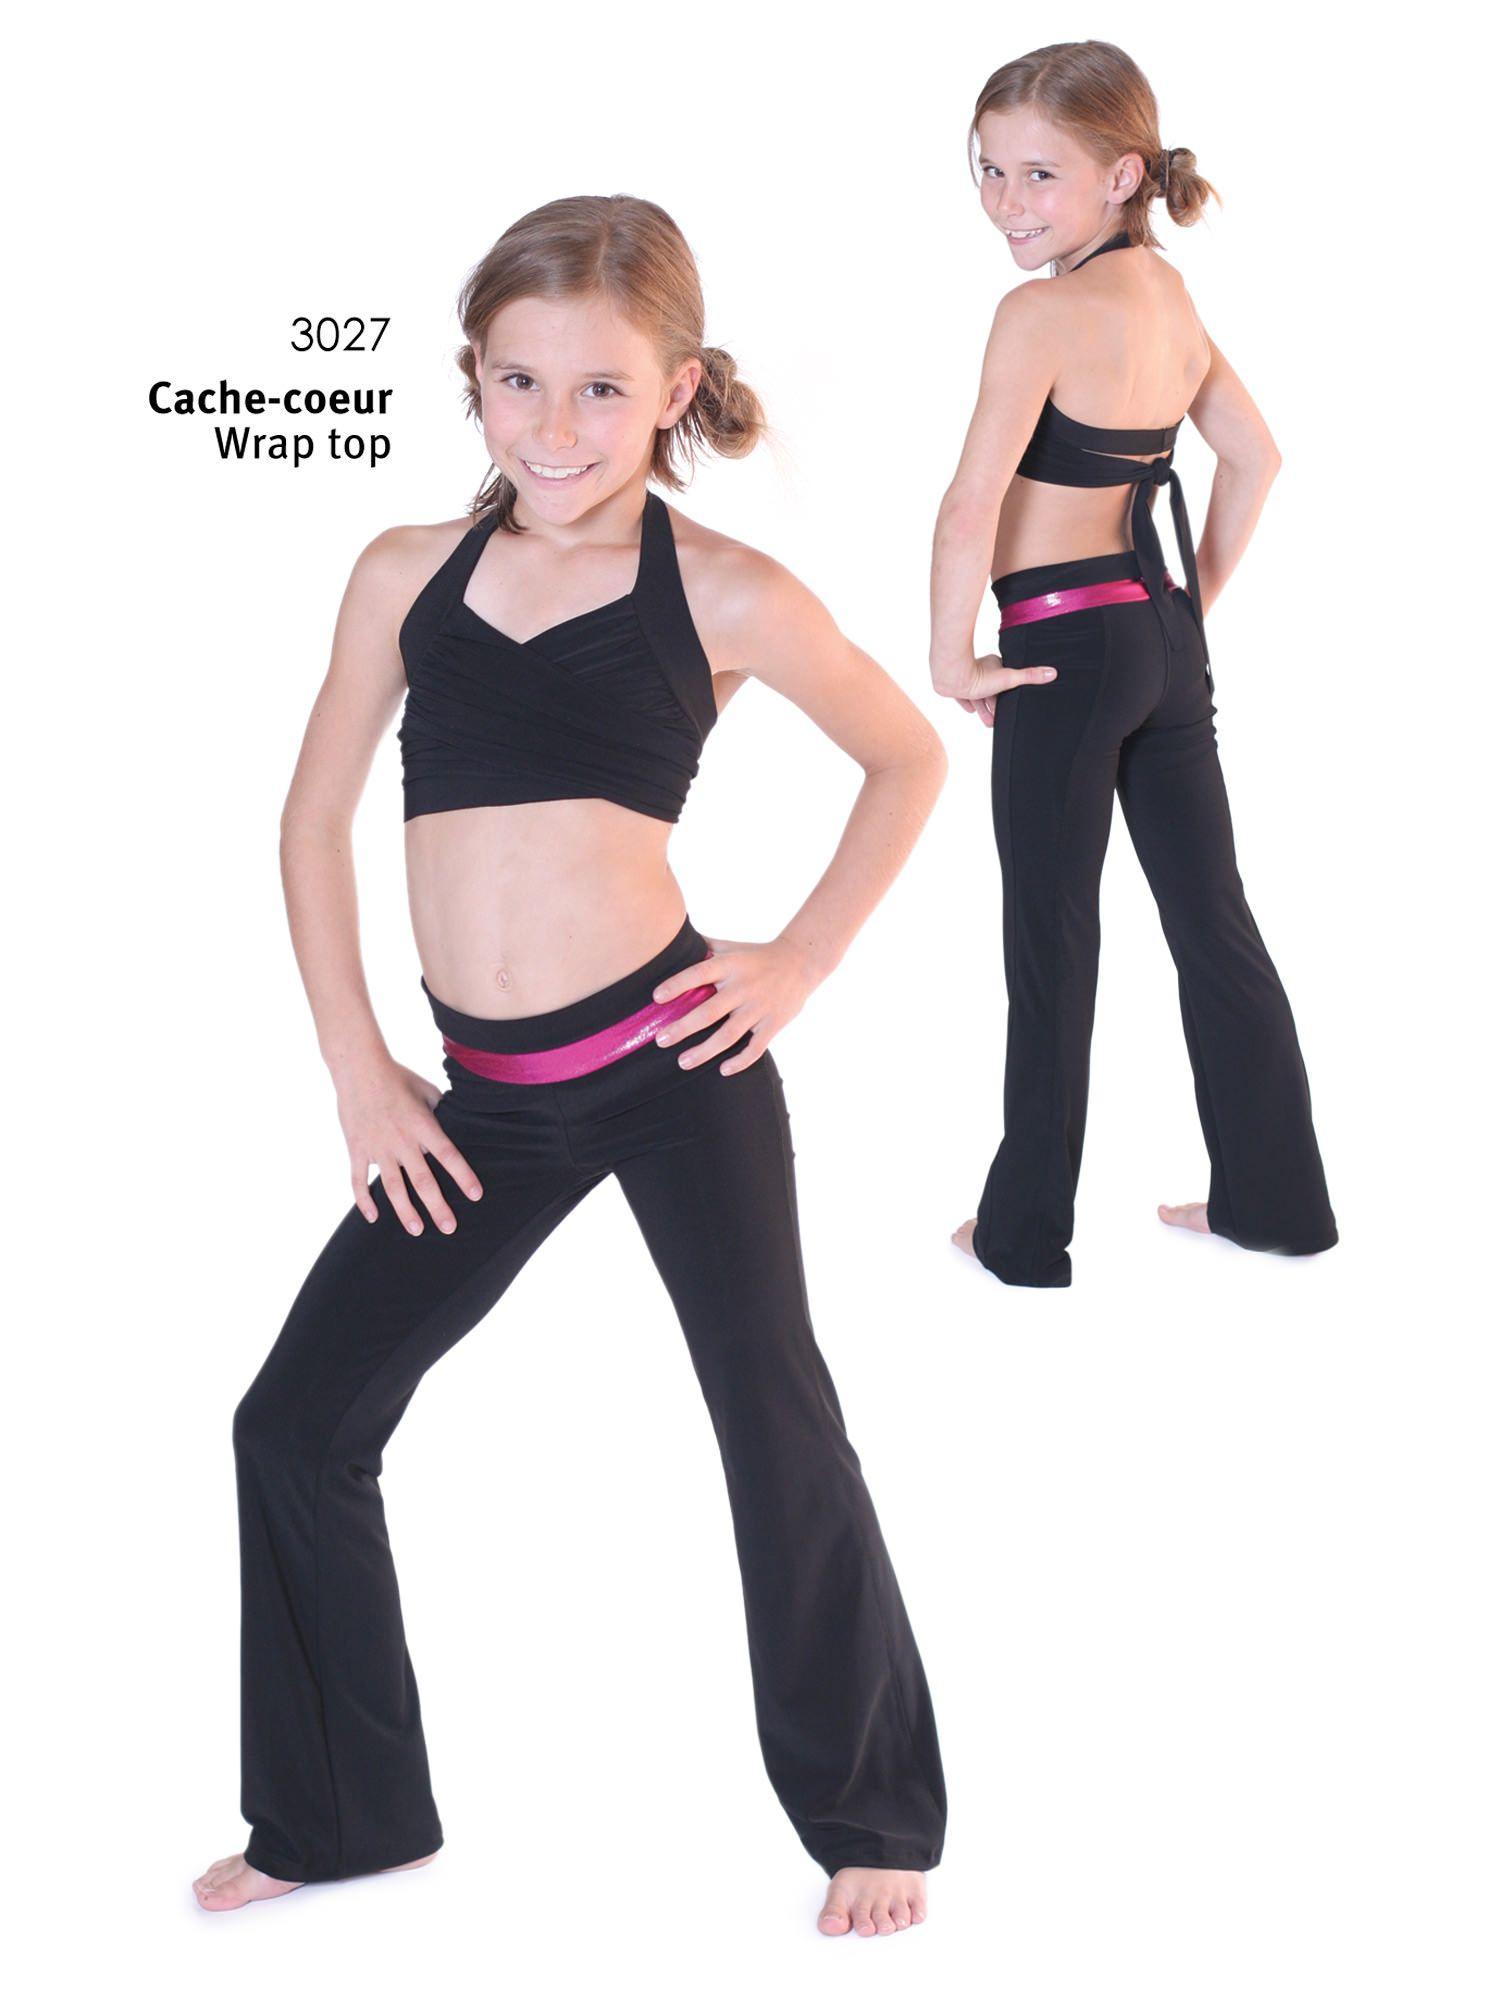 Relaxed jersey pants Leo, yoga pants, pyjama pants - S-M / US size 6-8 / UK  8-10 - sewing pattern A4 + US letter